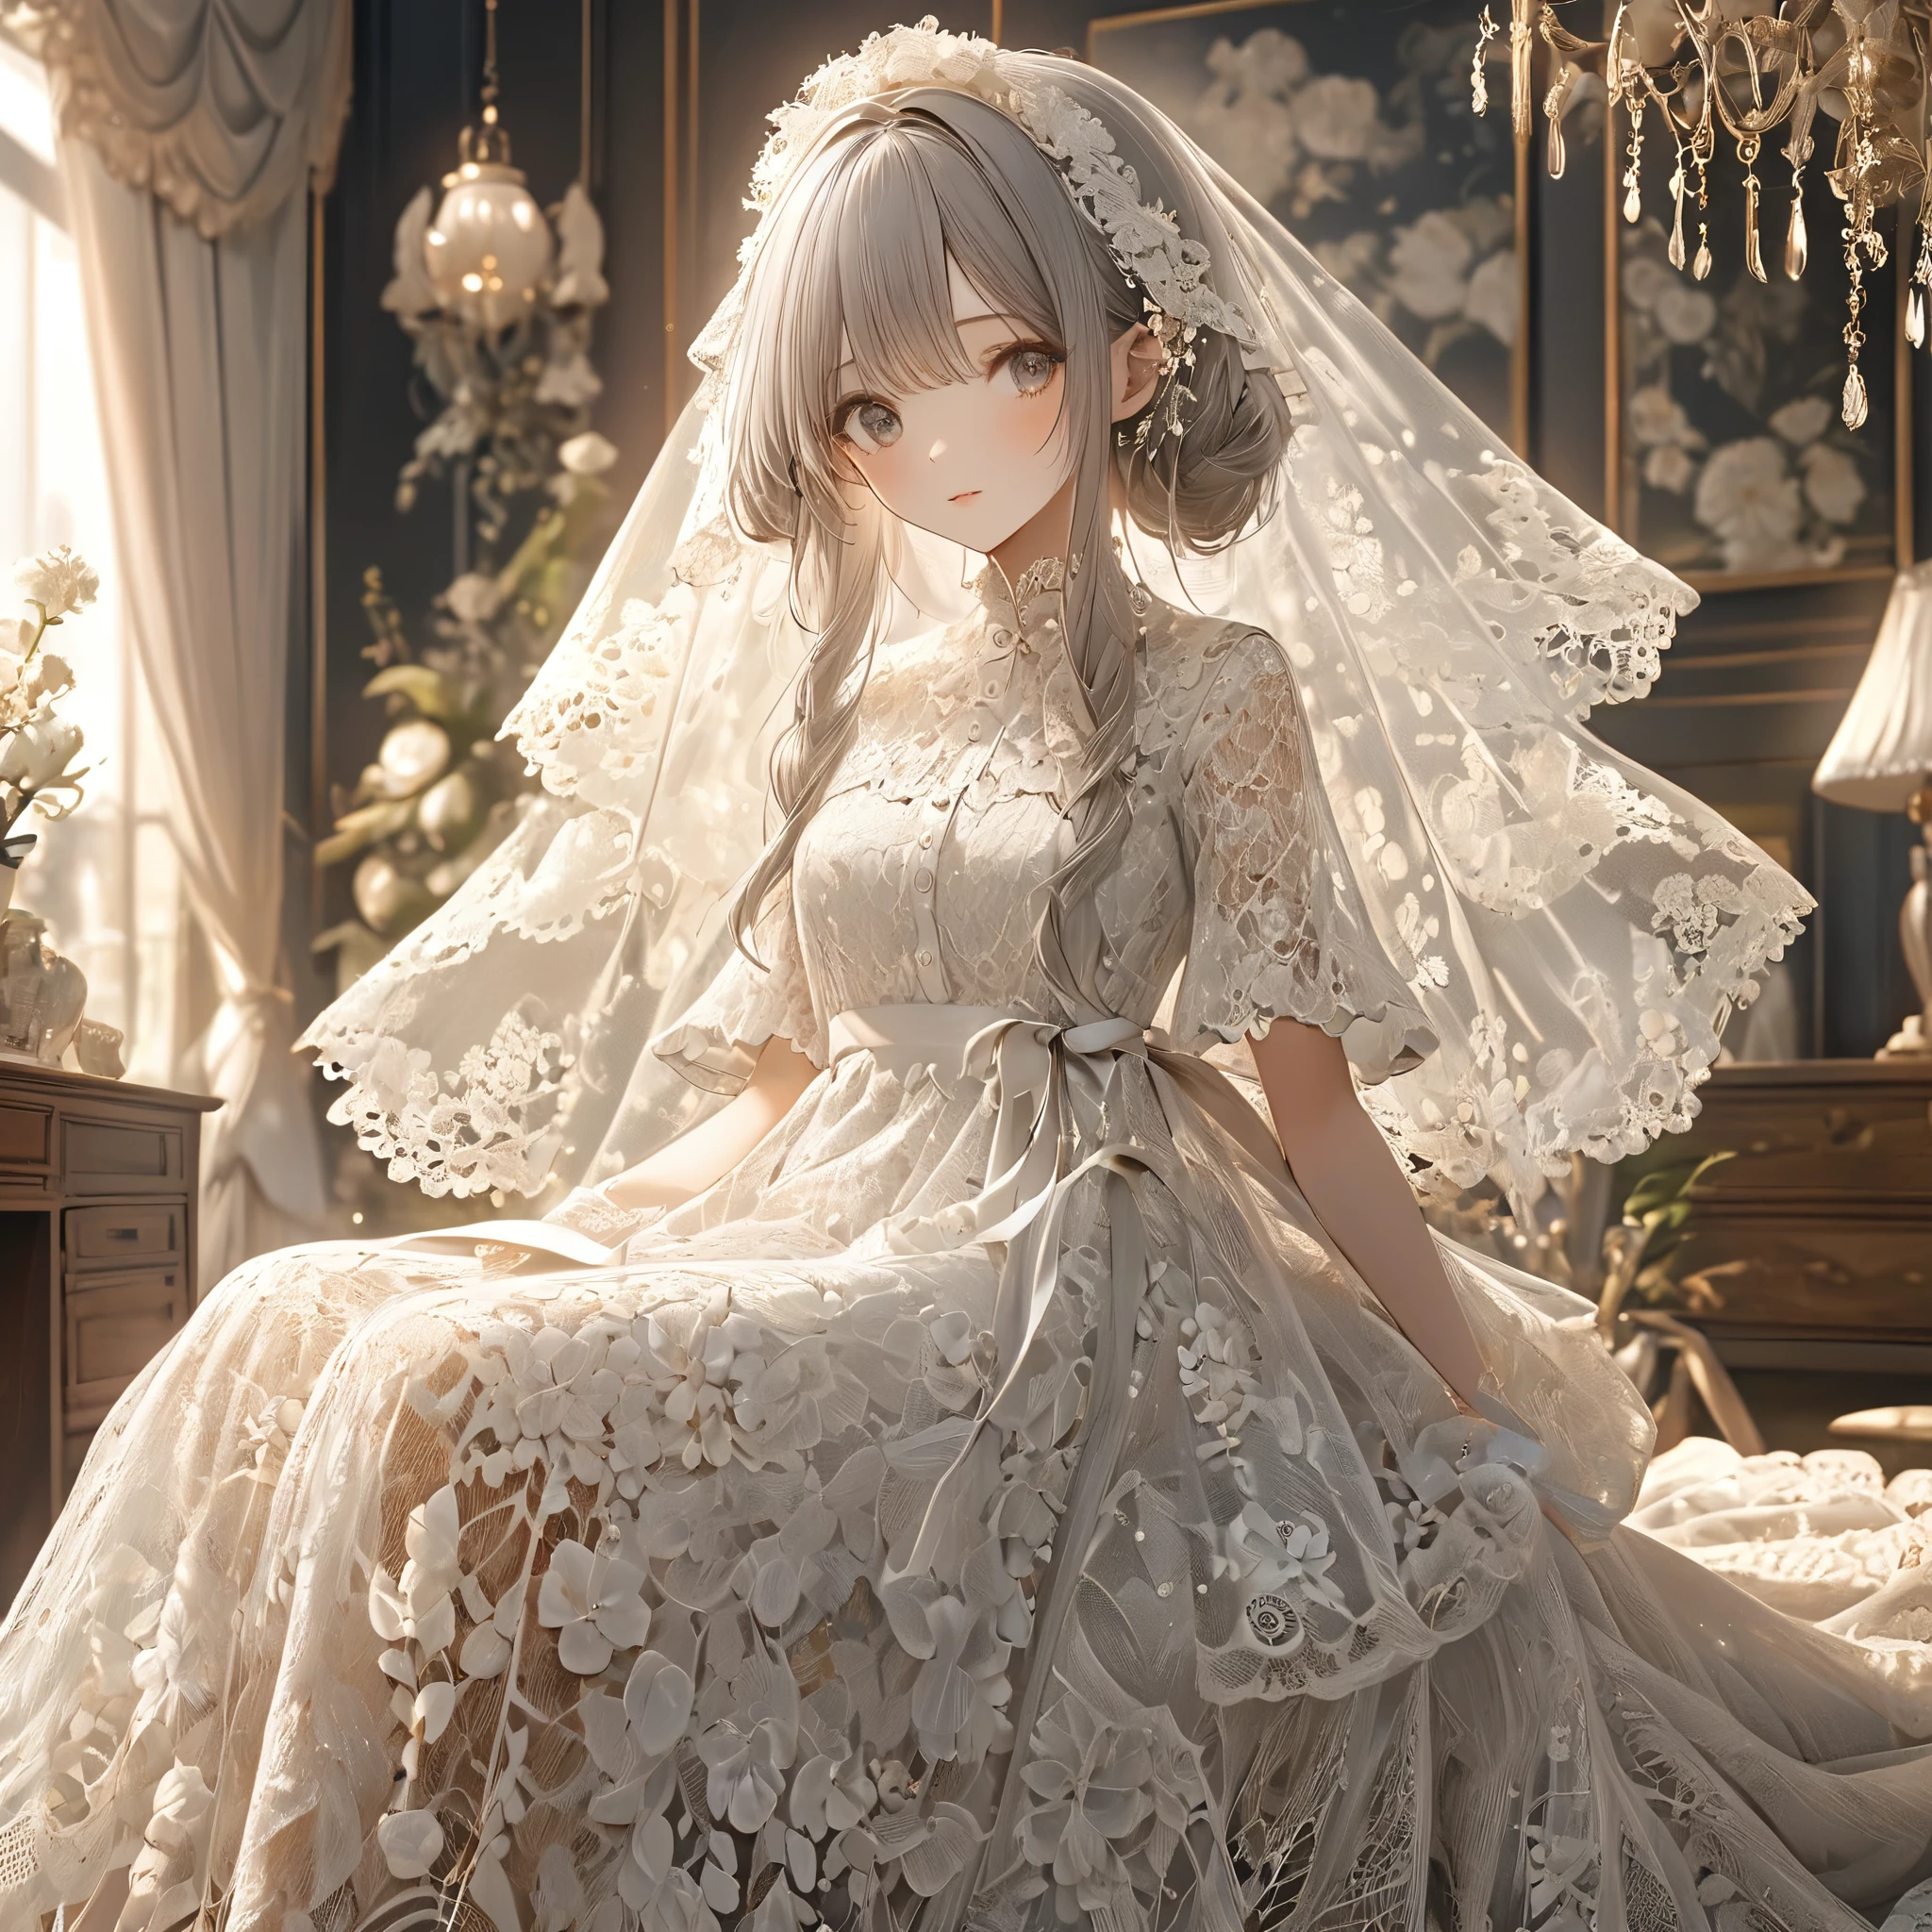 Clothing made of white lace, Beautiful lace dress, Lace clothes for room decoration, indoor, White lace, Very delicate lace, best quality:1.2, 4K, 8K, Very detailed, High Detail, masterpiece:1.2,